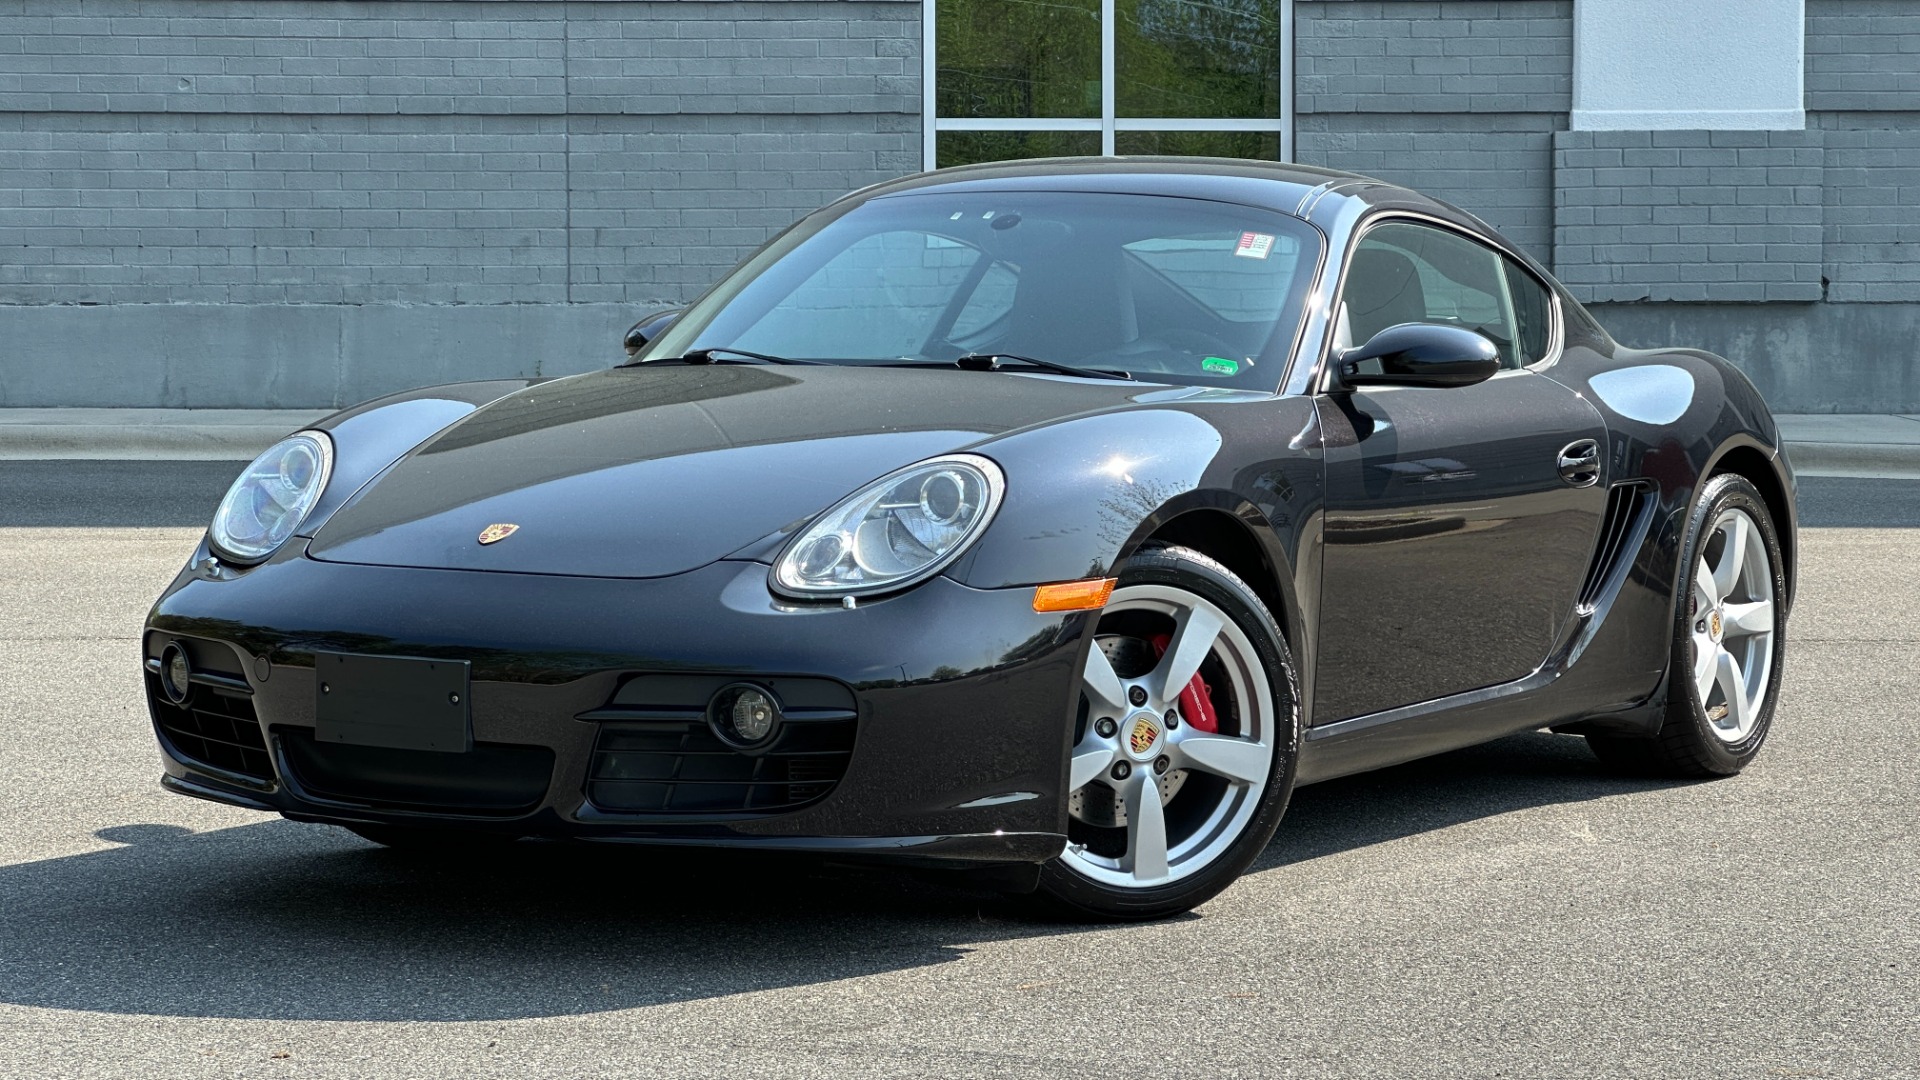 Used 2008 Porsche Cayman S / 6 SPEED / BOSE / PAINT PROTECTION / UPGRADED RADIO / POWER SEAT PKG for sale $29,800 at Formula Imports in Charlotte NC 28227 1